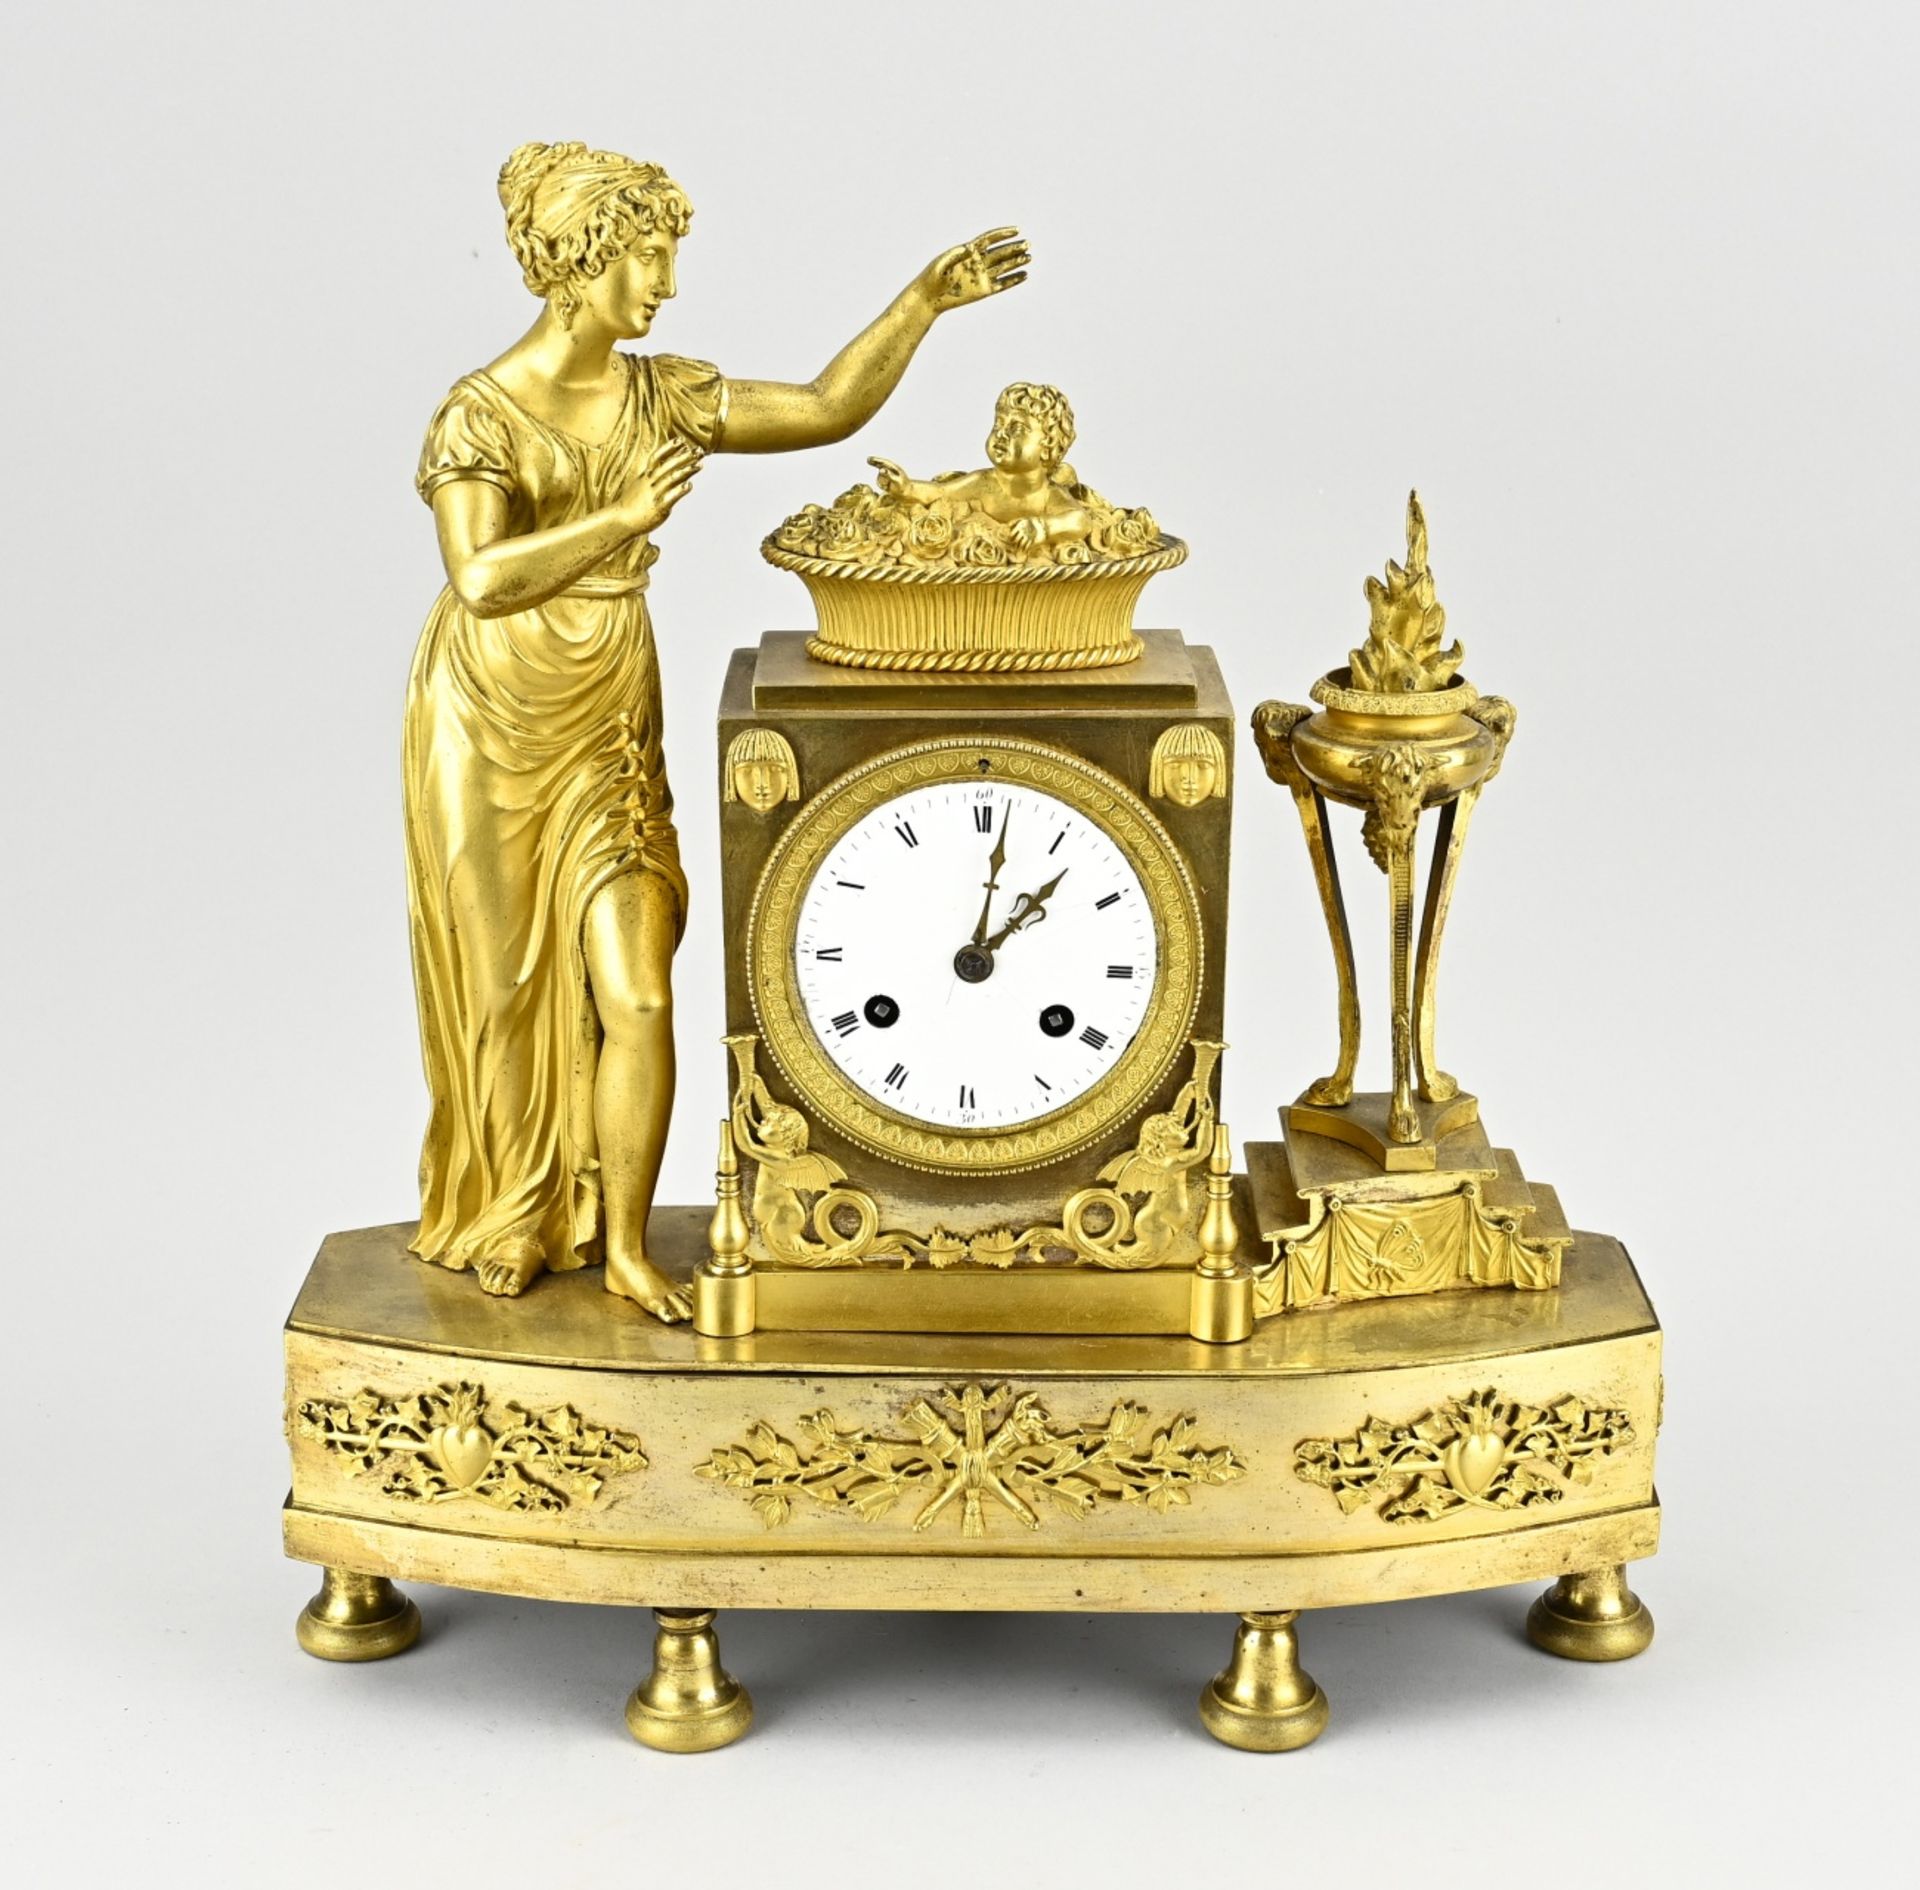 French Directoire mantel clock, 1800